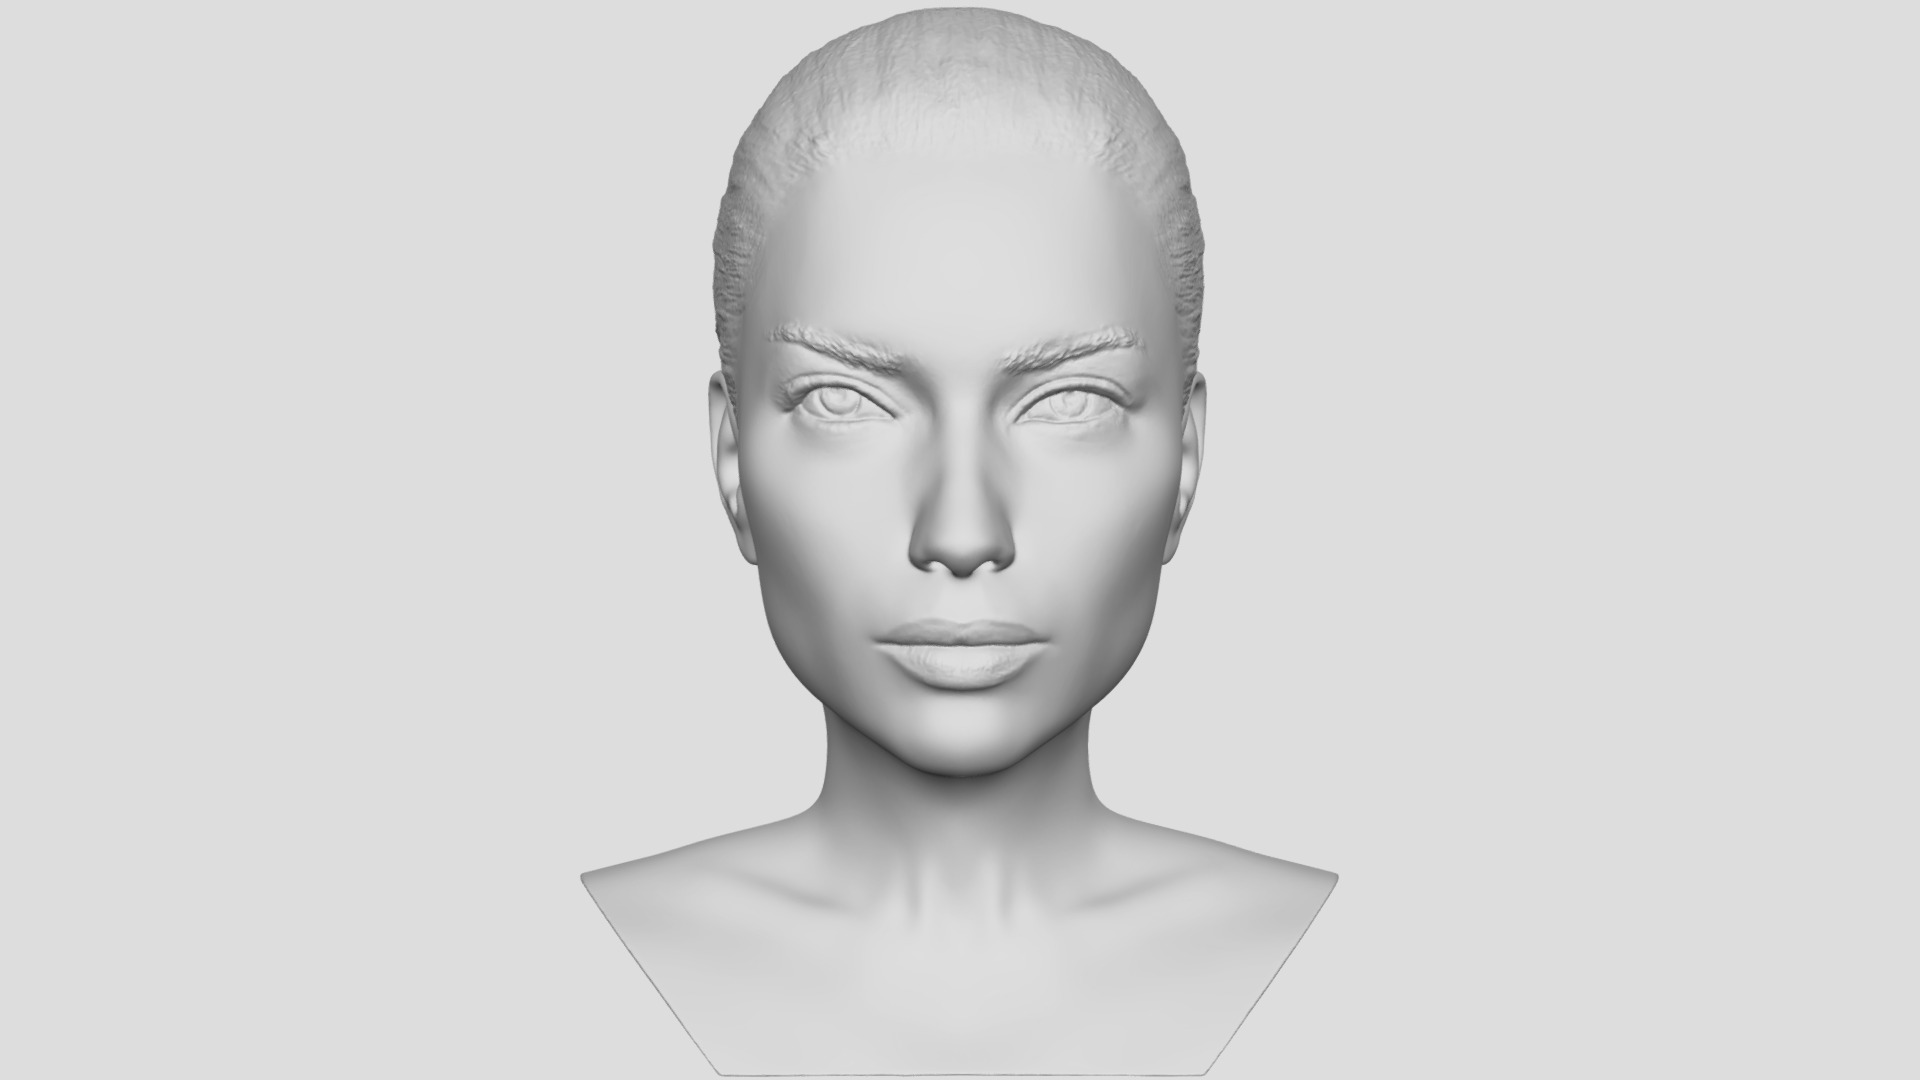 3D model Adriana Lima bust for 3D printing - This is a 3D model of the Adriana Lima bust for 3D printing. The 3D model is about a bust of a person.